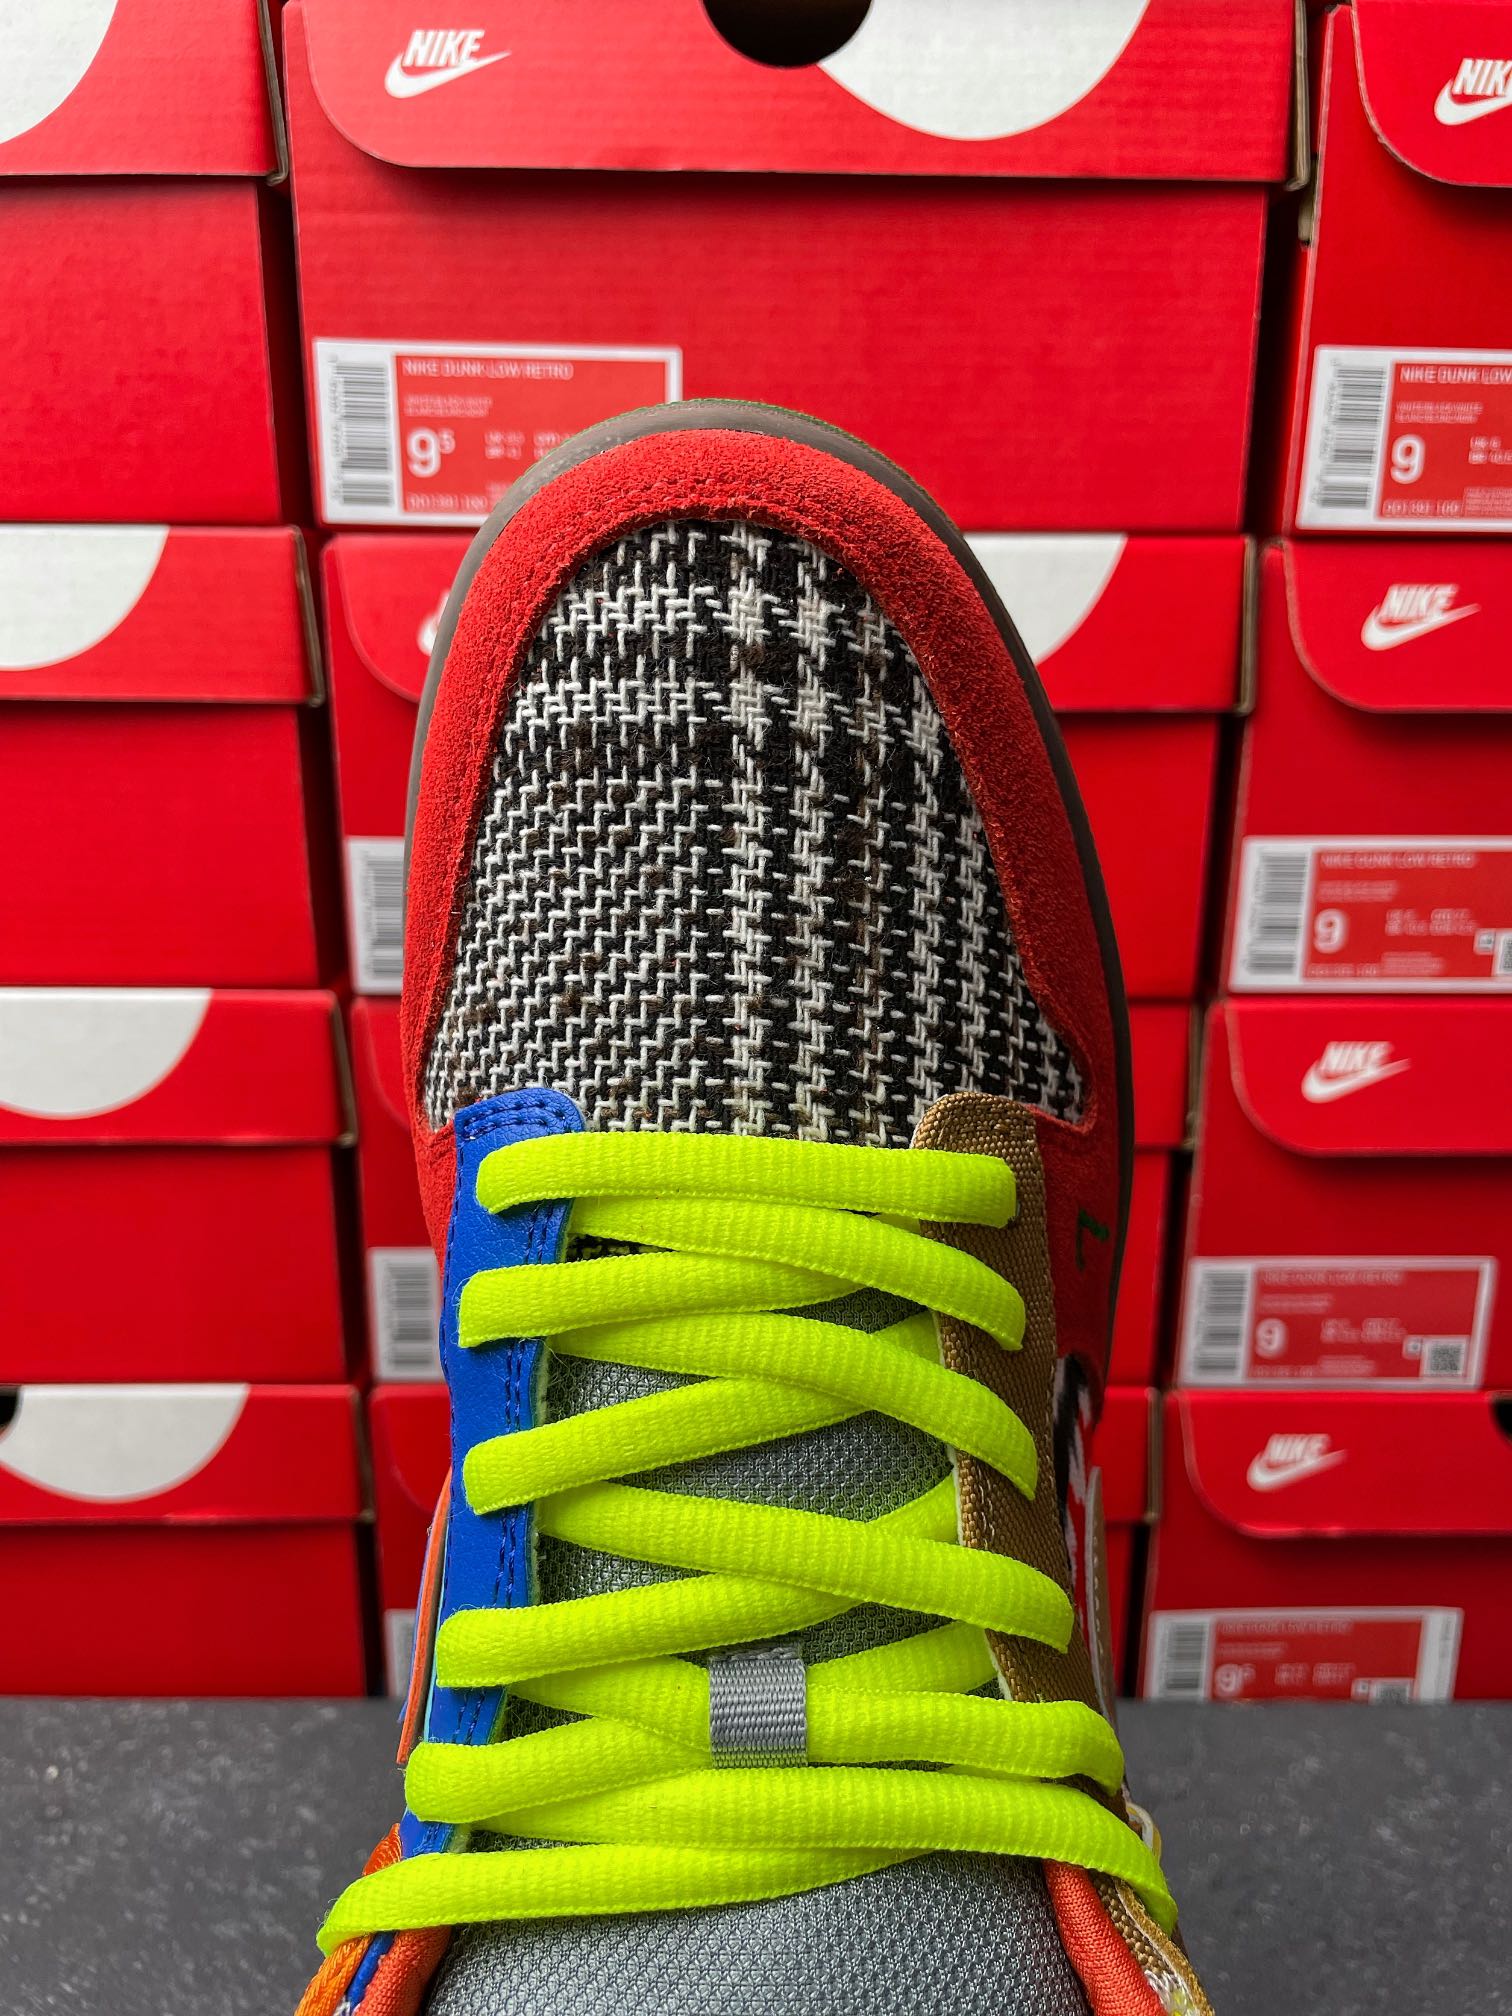 S2 Batch-Nike Dunk SB Low “What The Dunk”